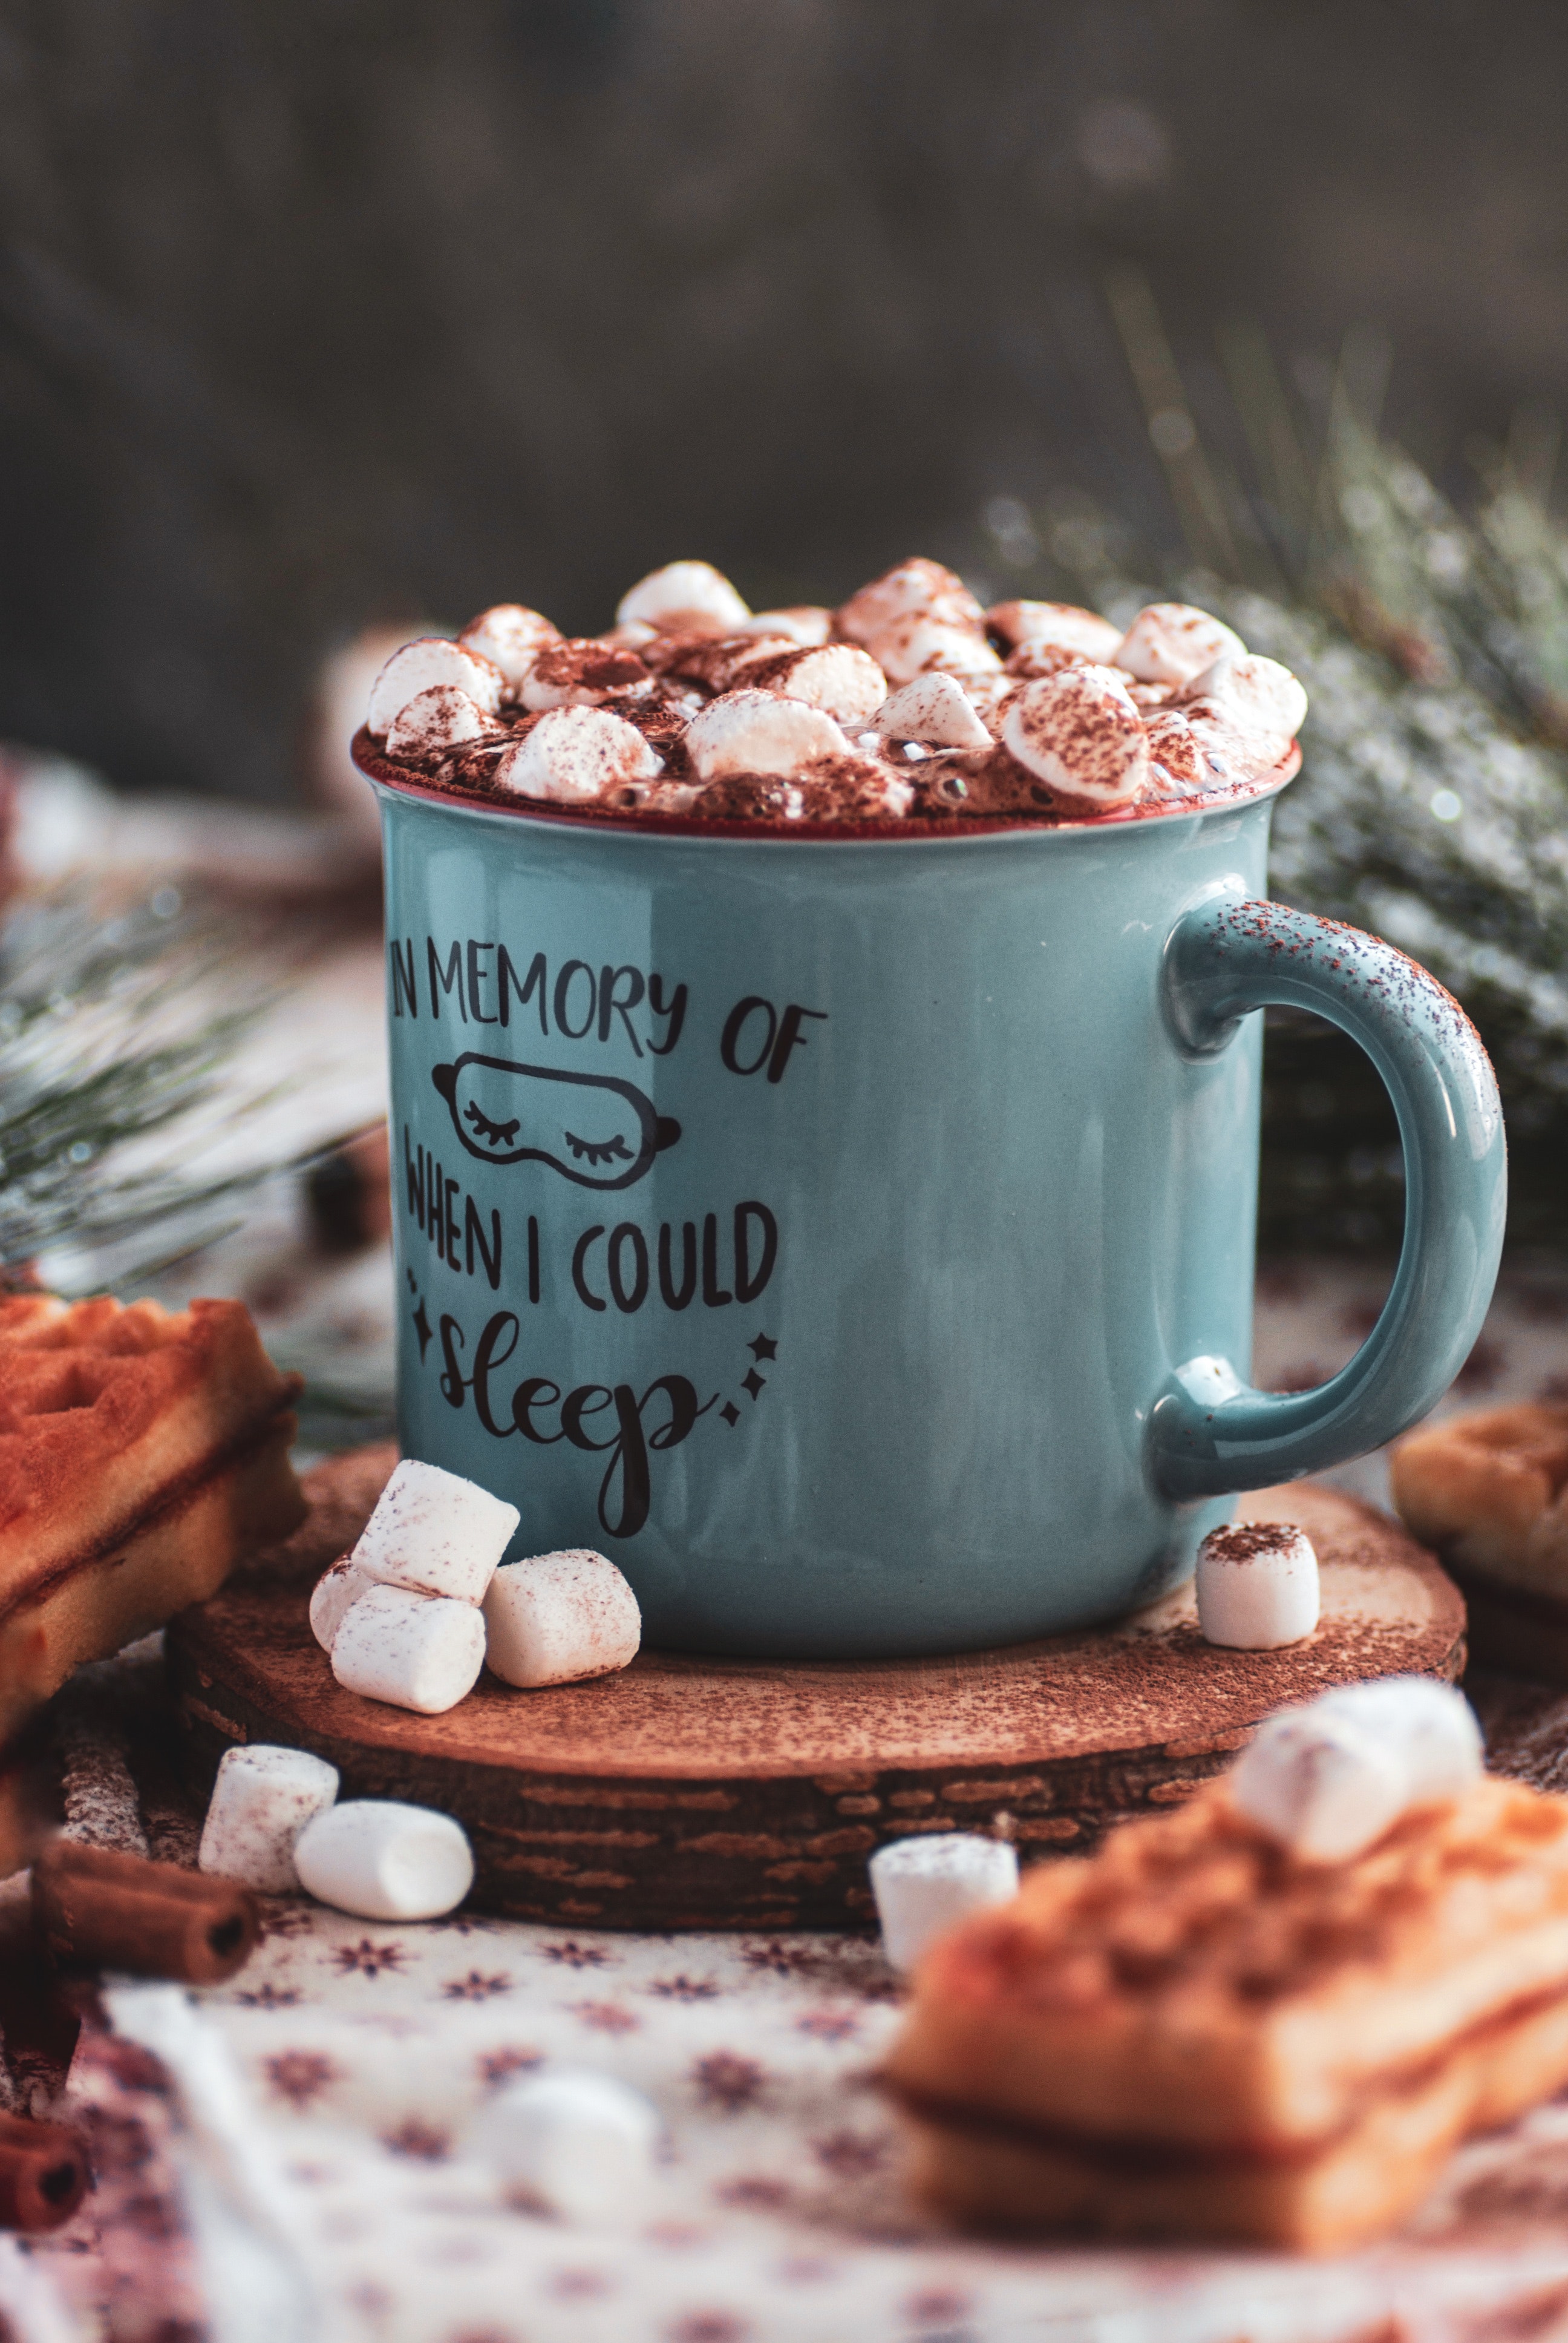 Wallpaper ID 397104  Food Hot Chocolate Phone Wallpaper Drink Cup  Still Life 1080x1920 free download